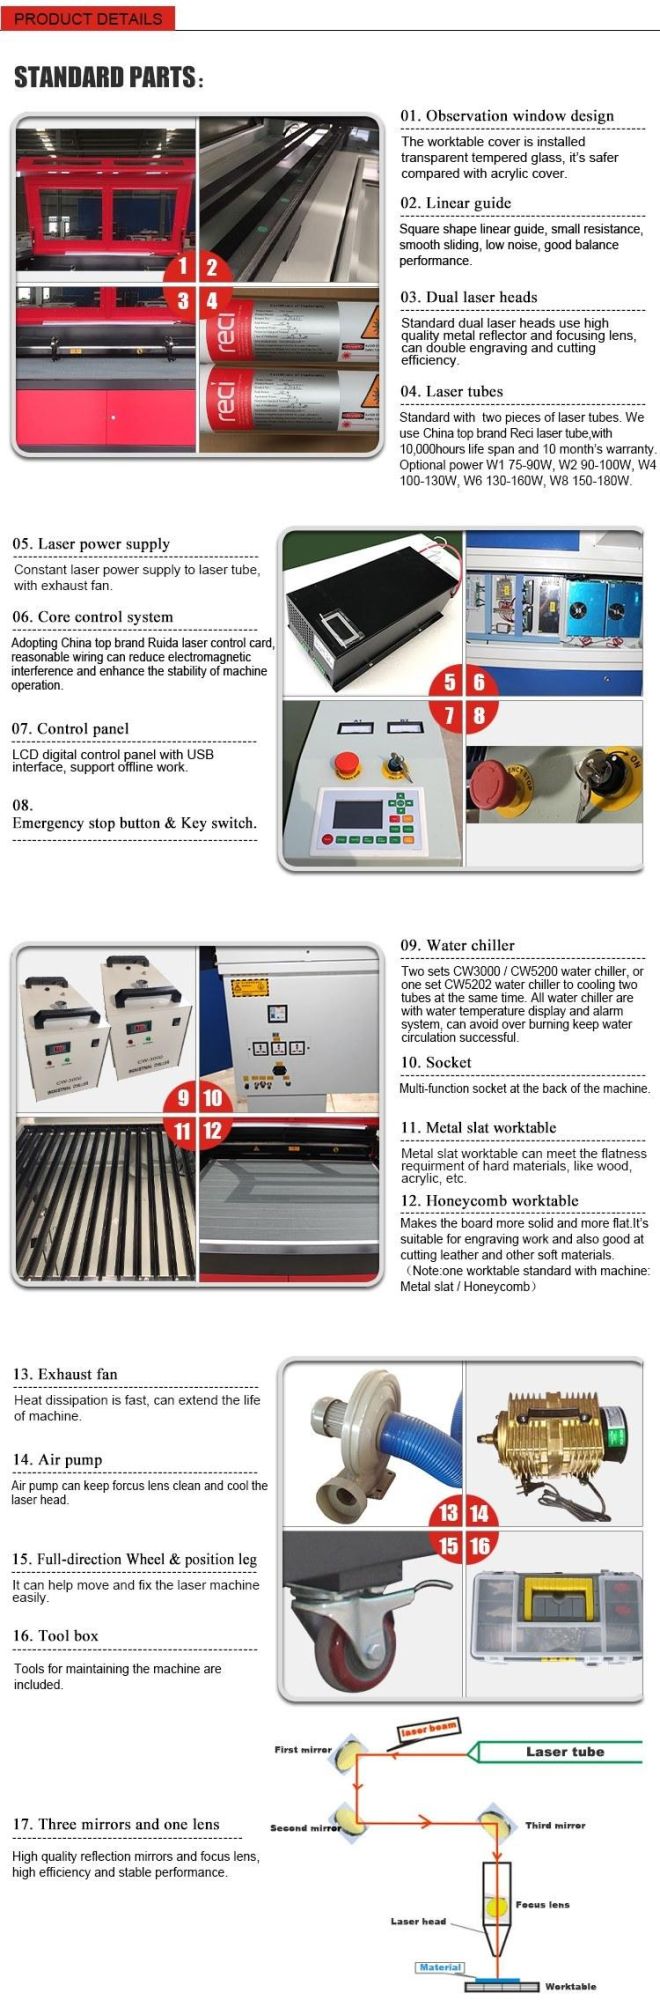 Leather Acrylic Reci 100W CO2 Laser Cutter with Double Heads